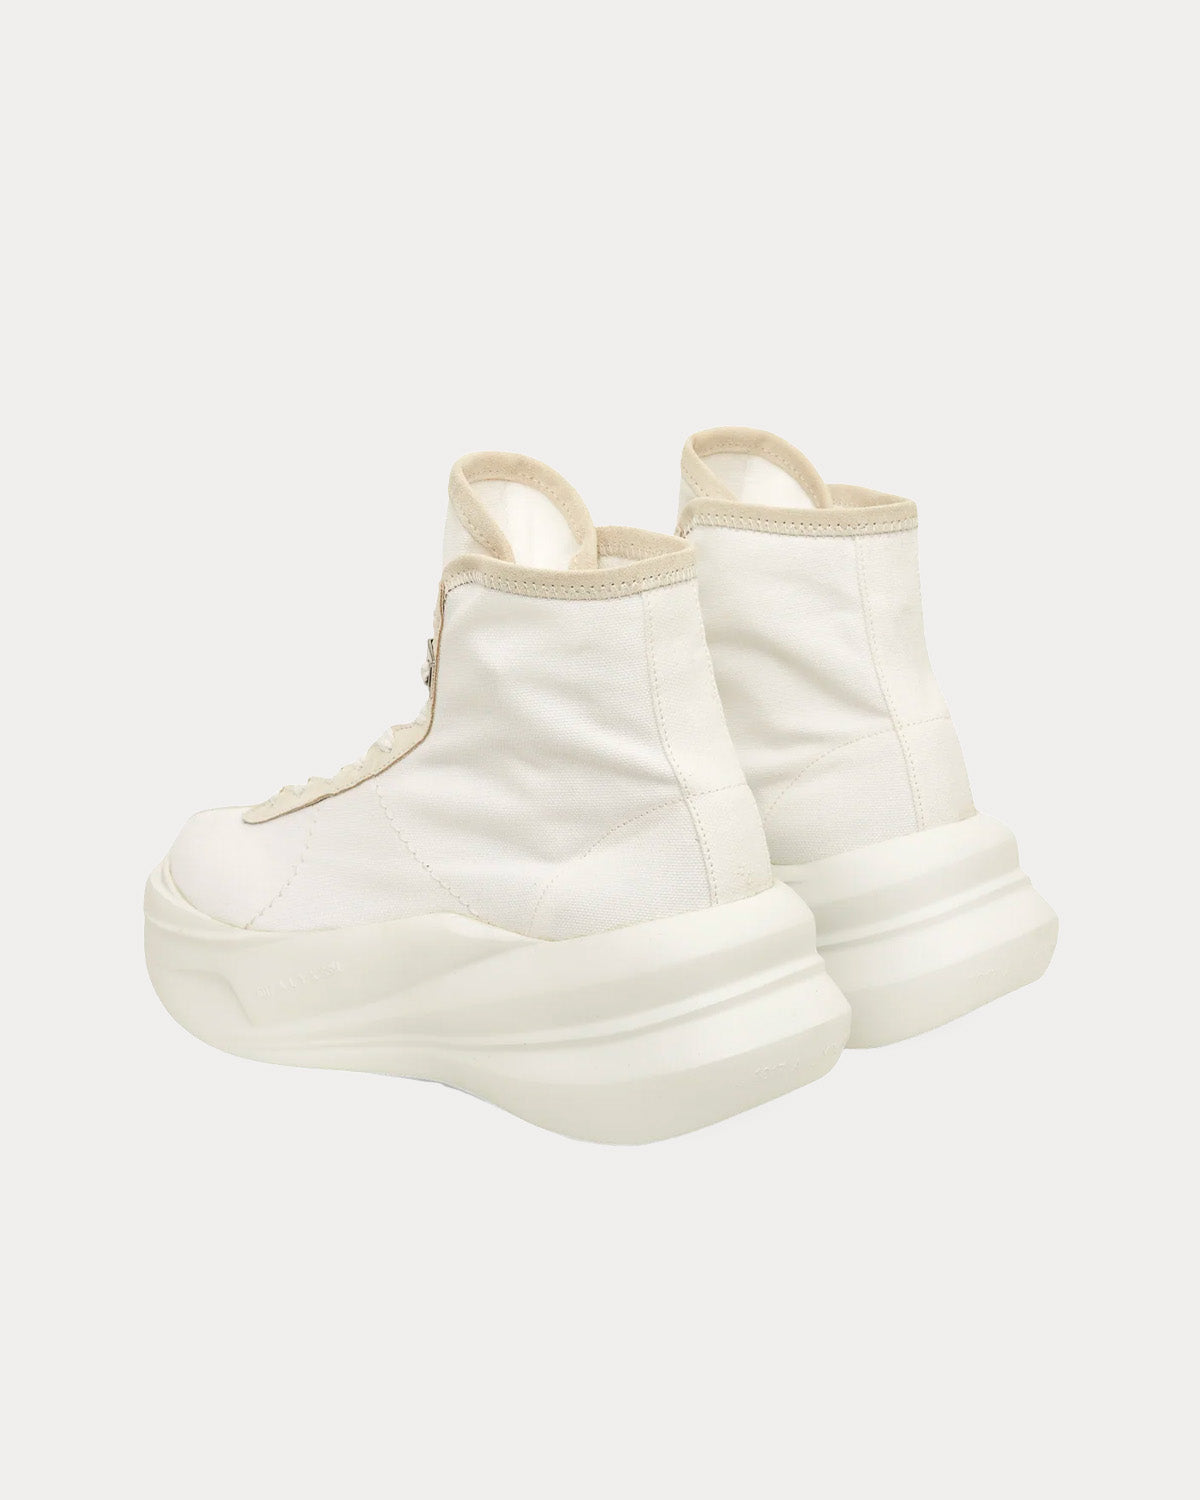 1017 ALYX 9SM - Aria Canvas White High Top Sneakers